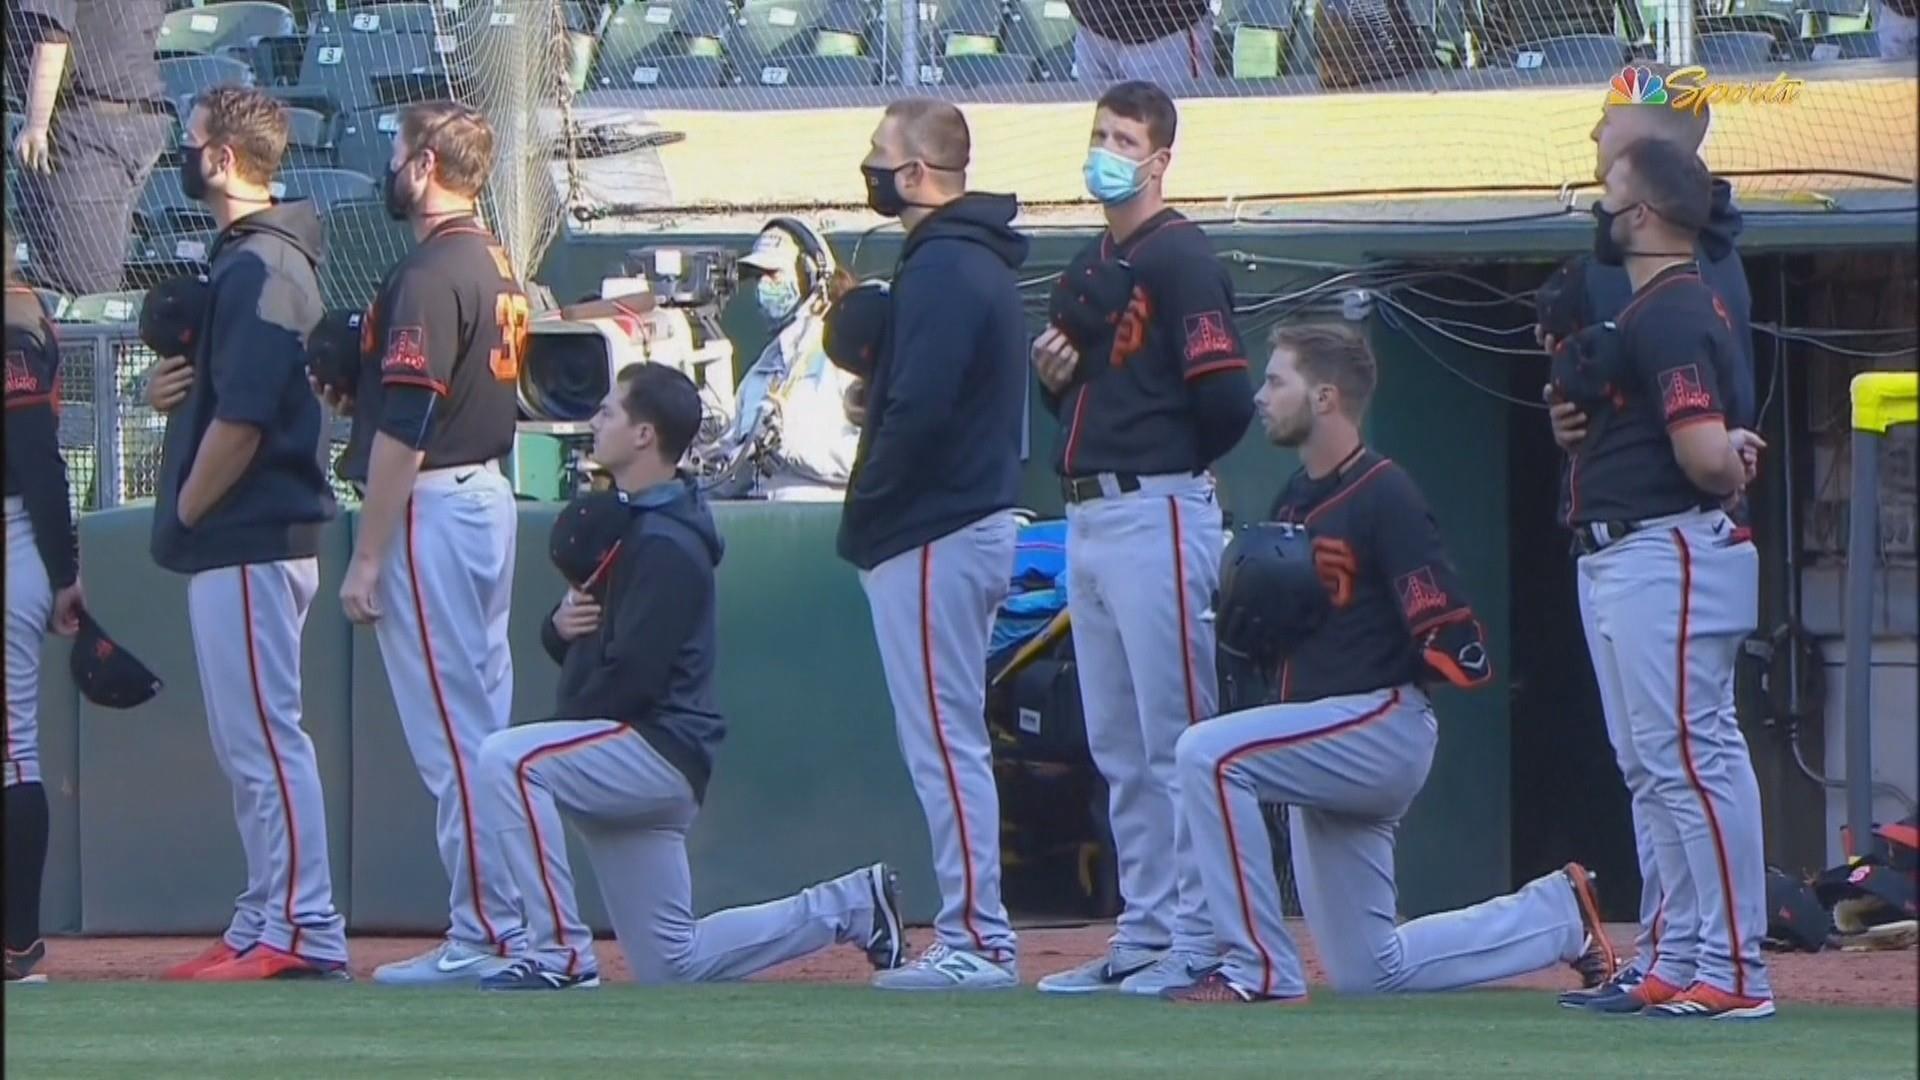 SF Giants Manager Says He Won't Be On Field For Anthem Until Country Changes